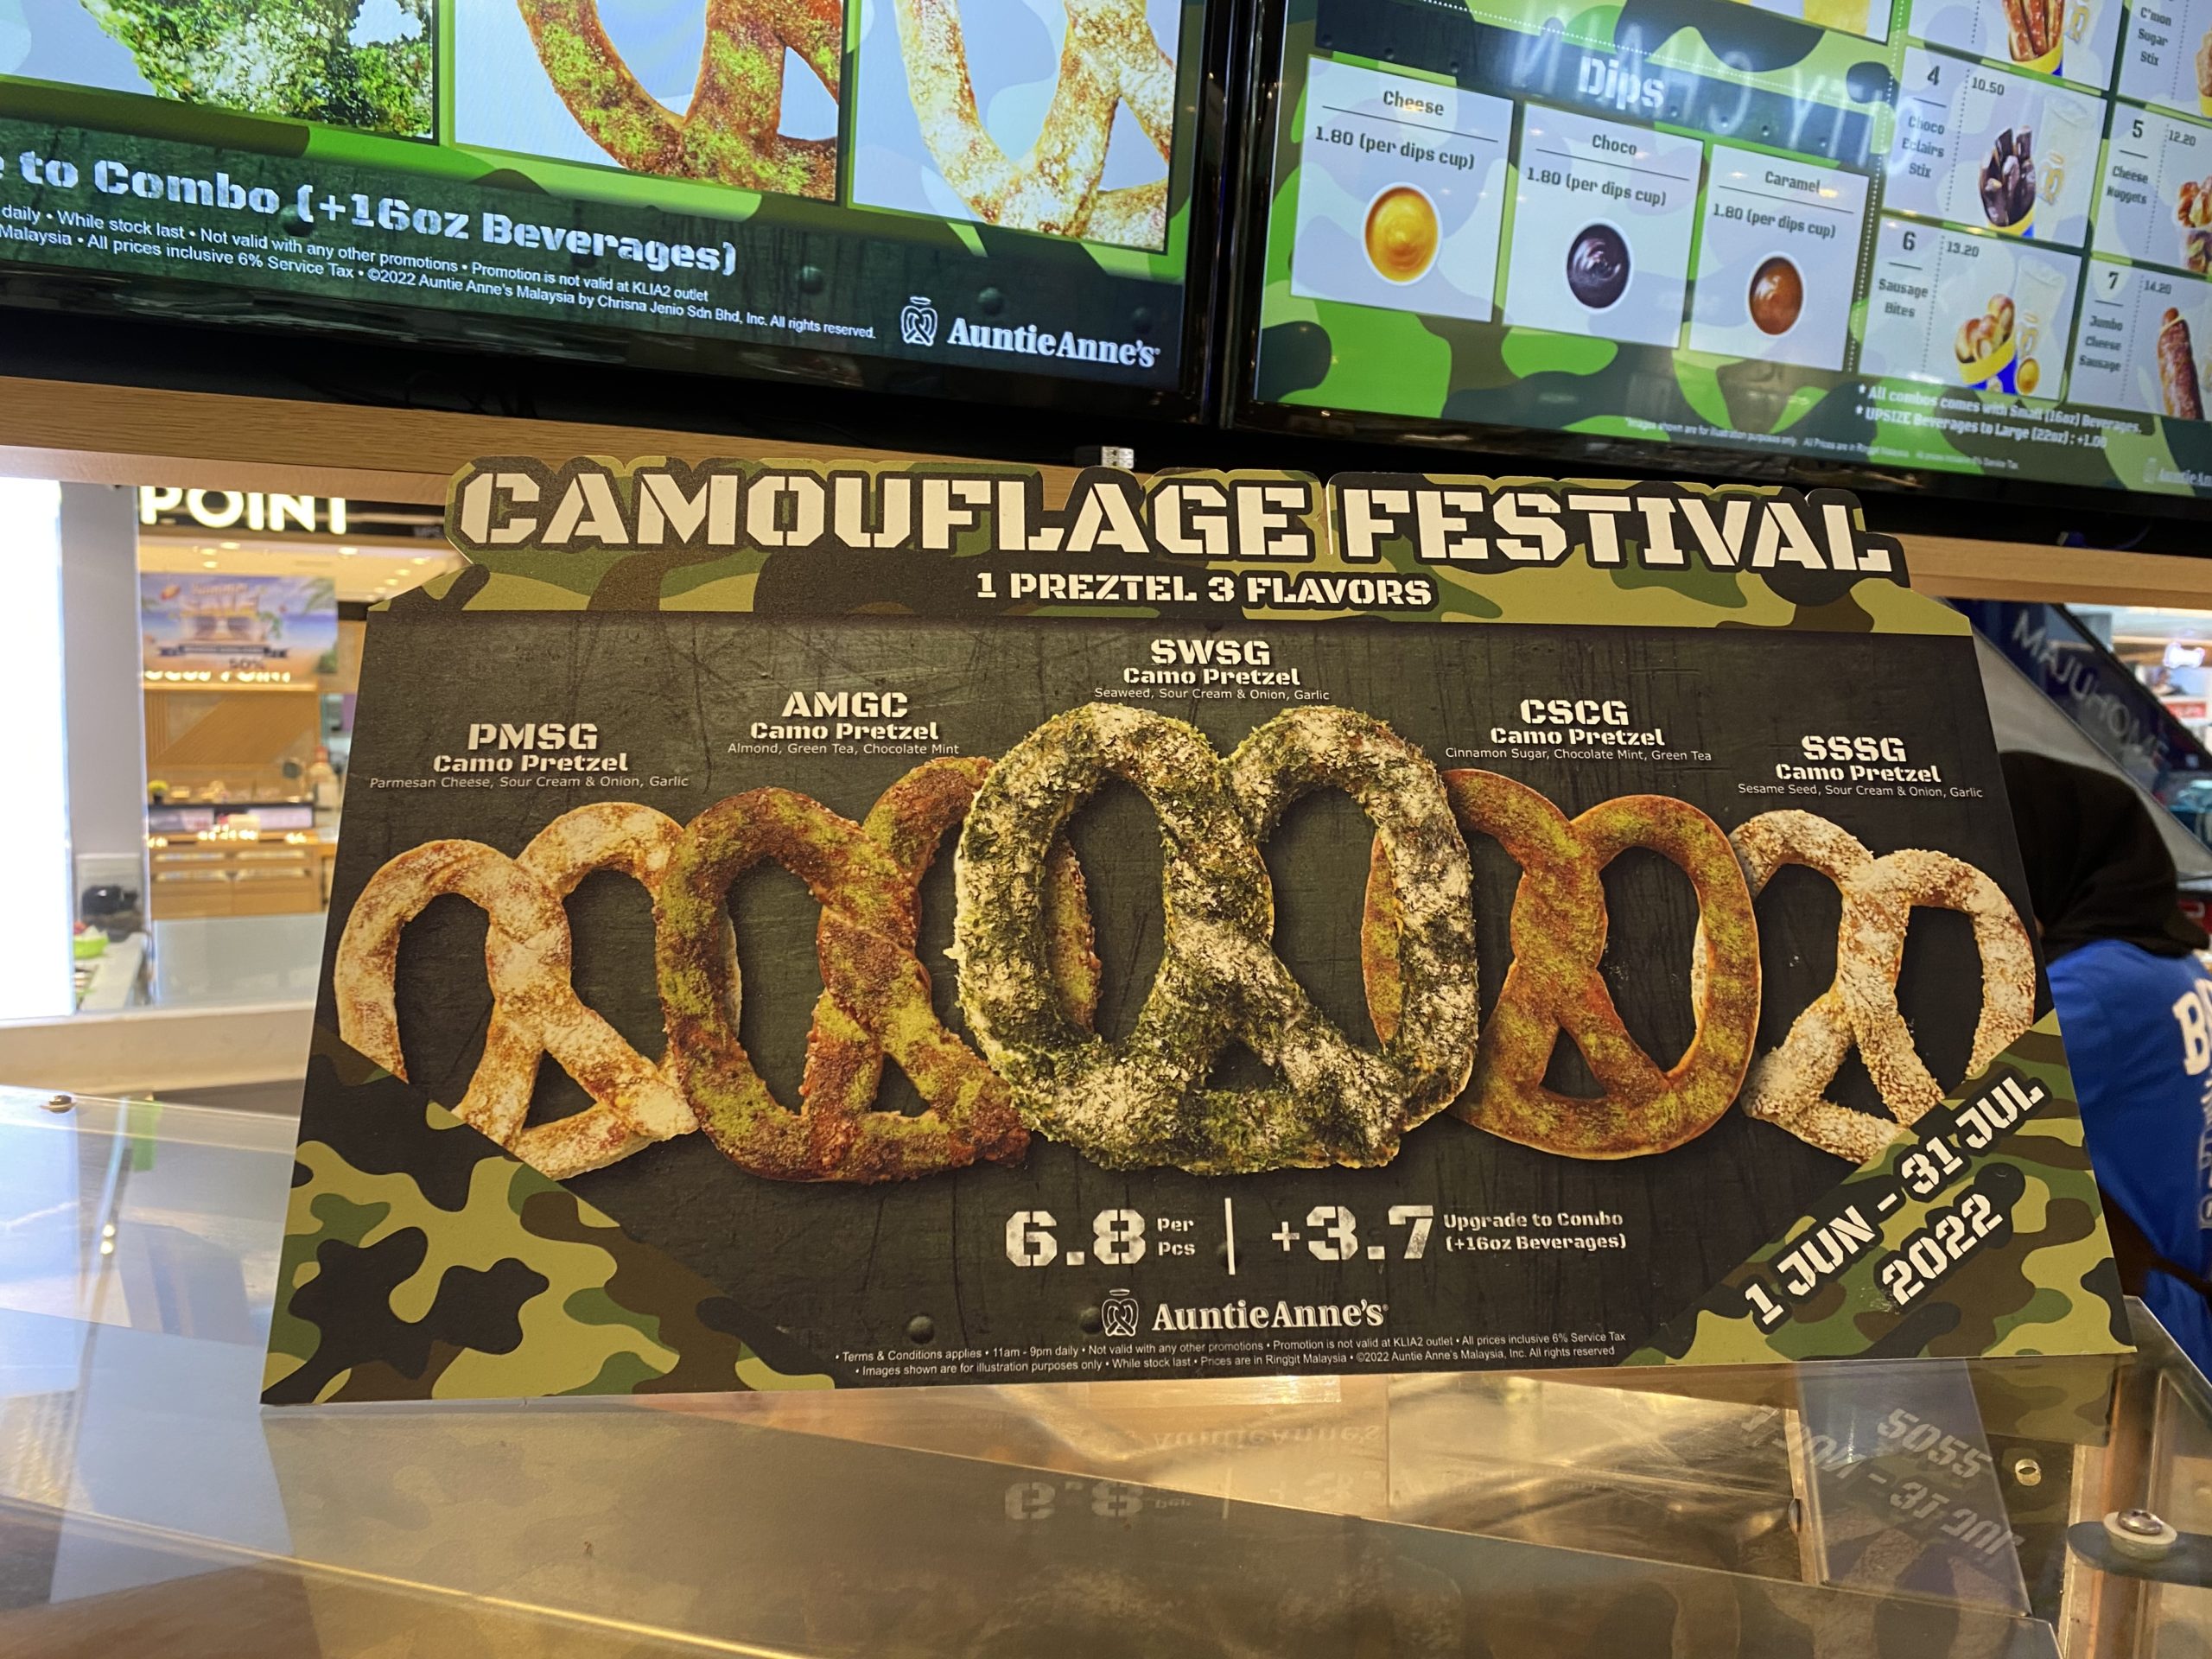 We tasted and ranked auntie anne's new camouflage pretzels where it has 3 flavours all rolled into one!